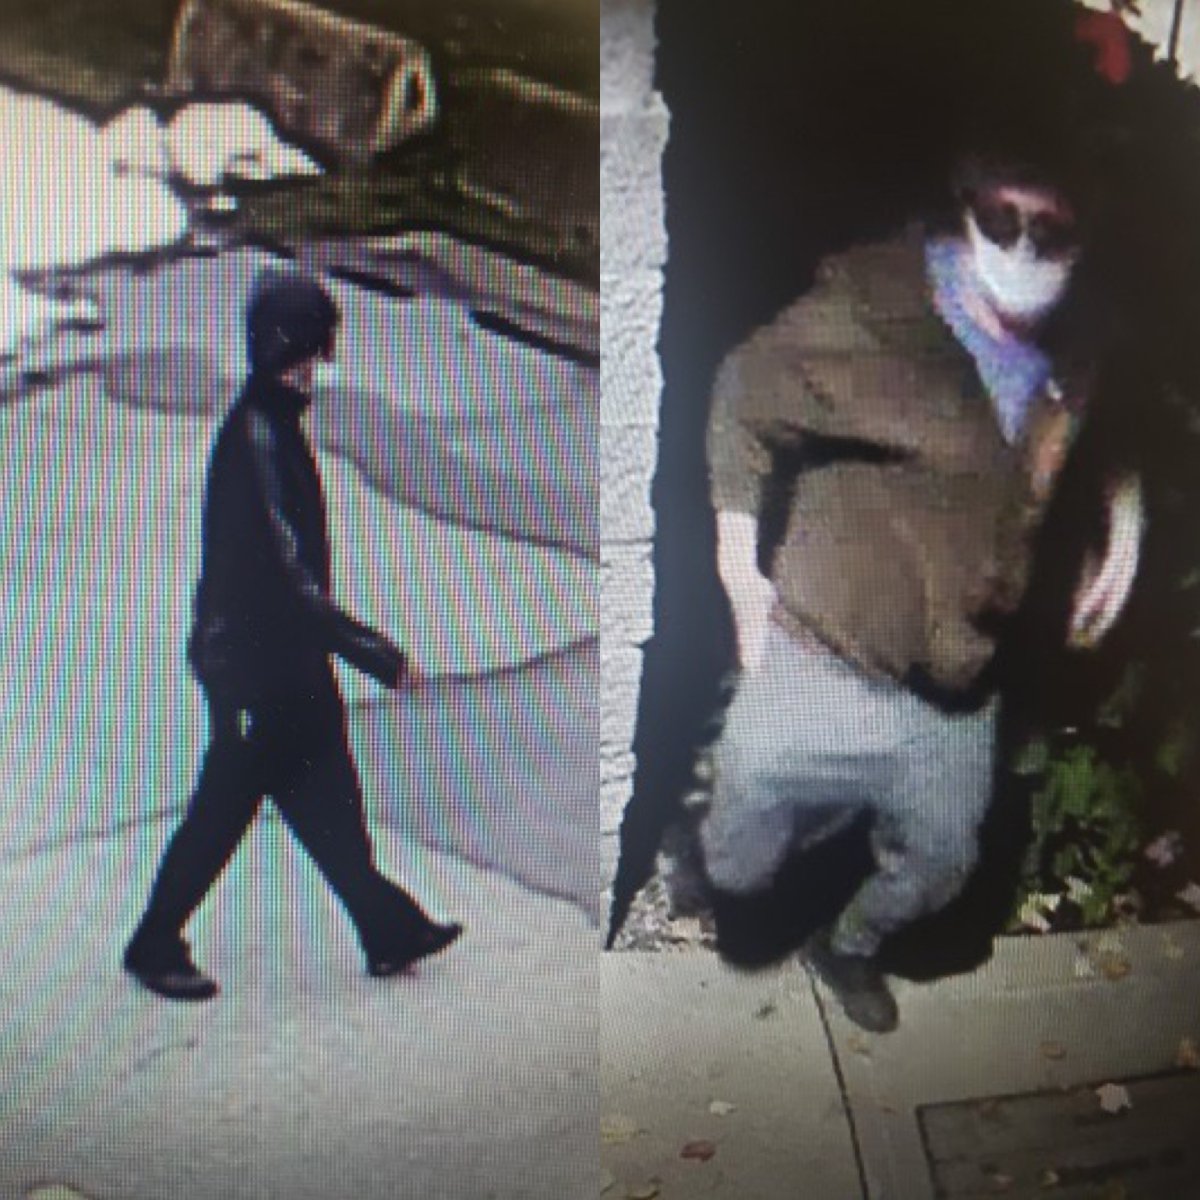 These photos were taken of a suspect in a groping and exposure incident in the Shuswap Oct. 21.